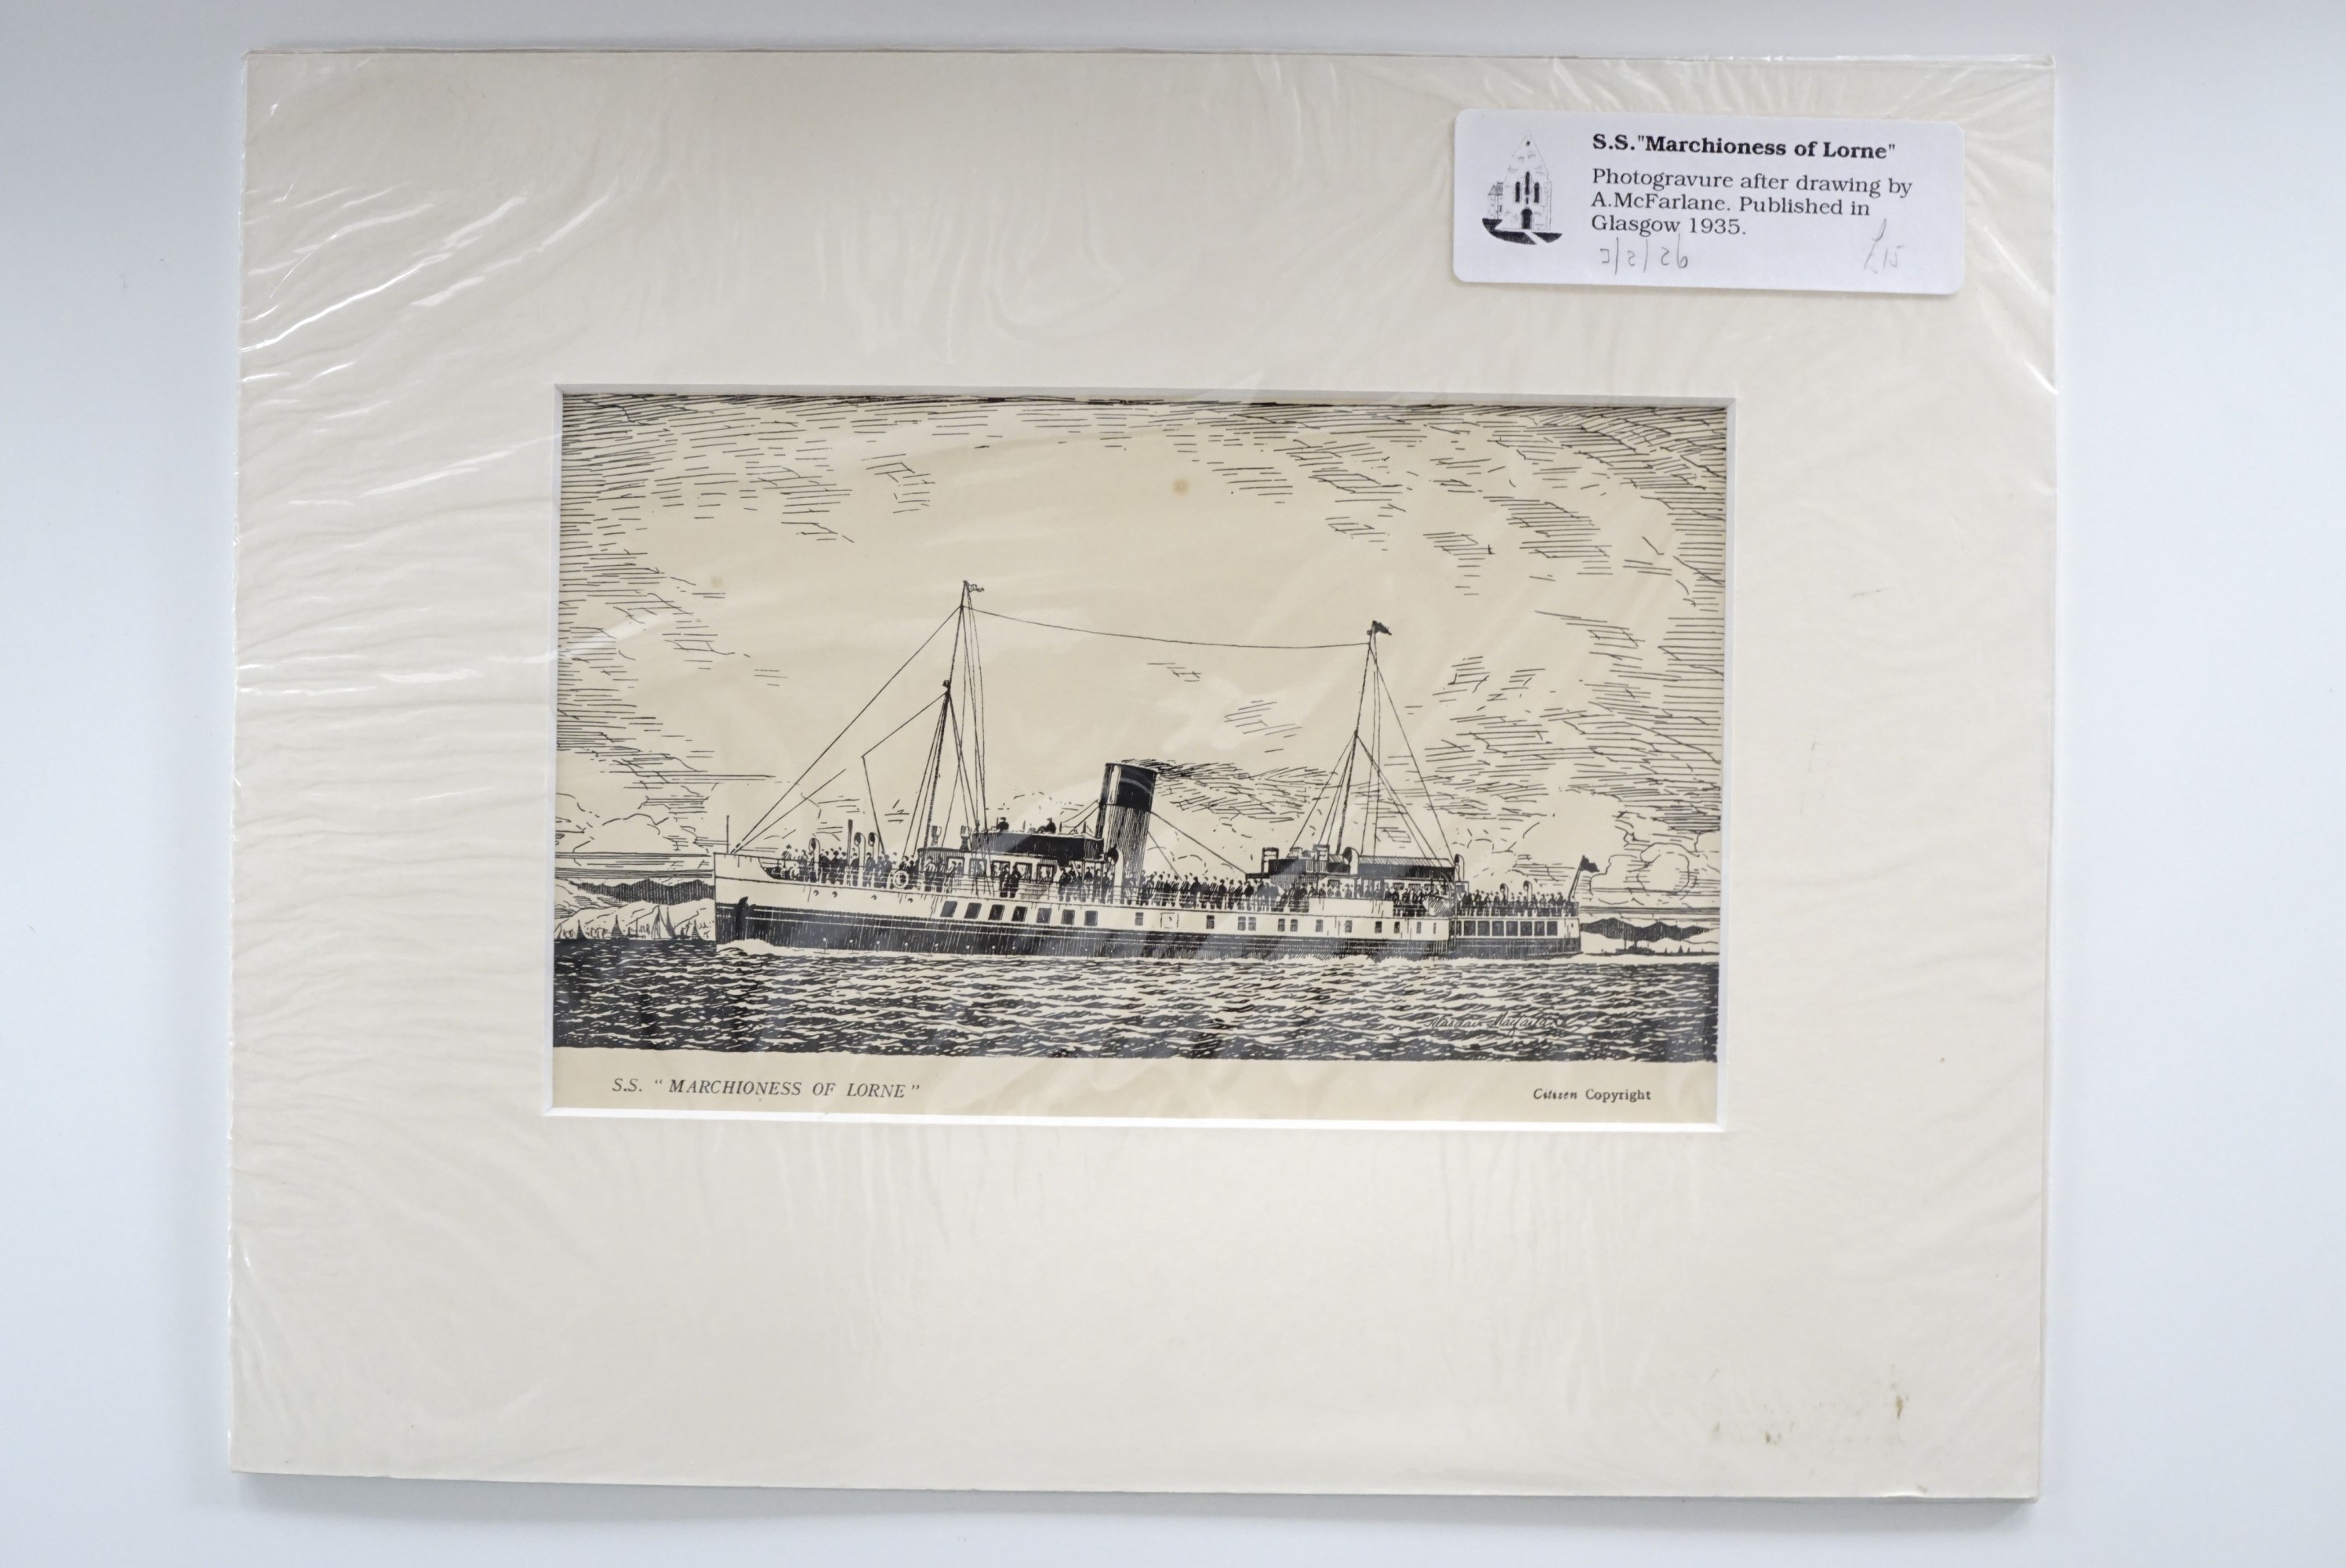 After A McFarlane (20th Century) A series of seven photogravure prints depicting cruise ships, - Image 5 of 7